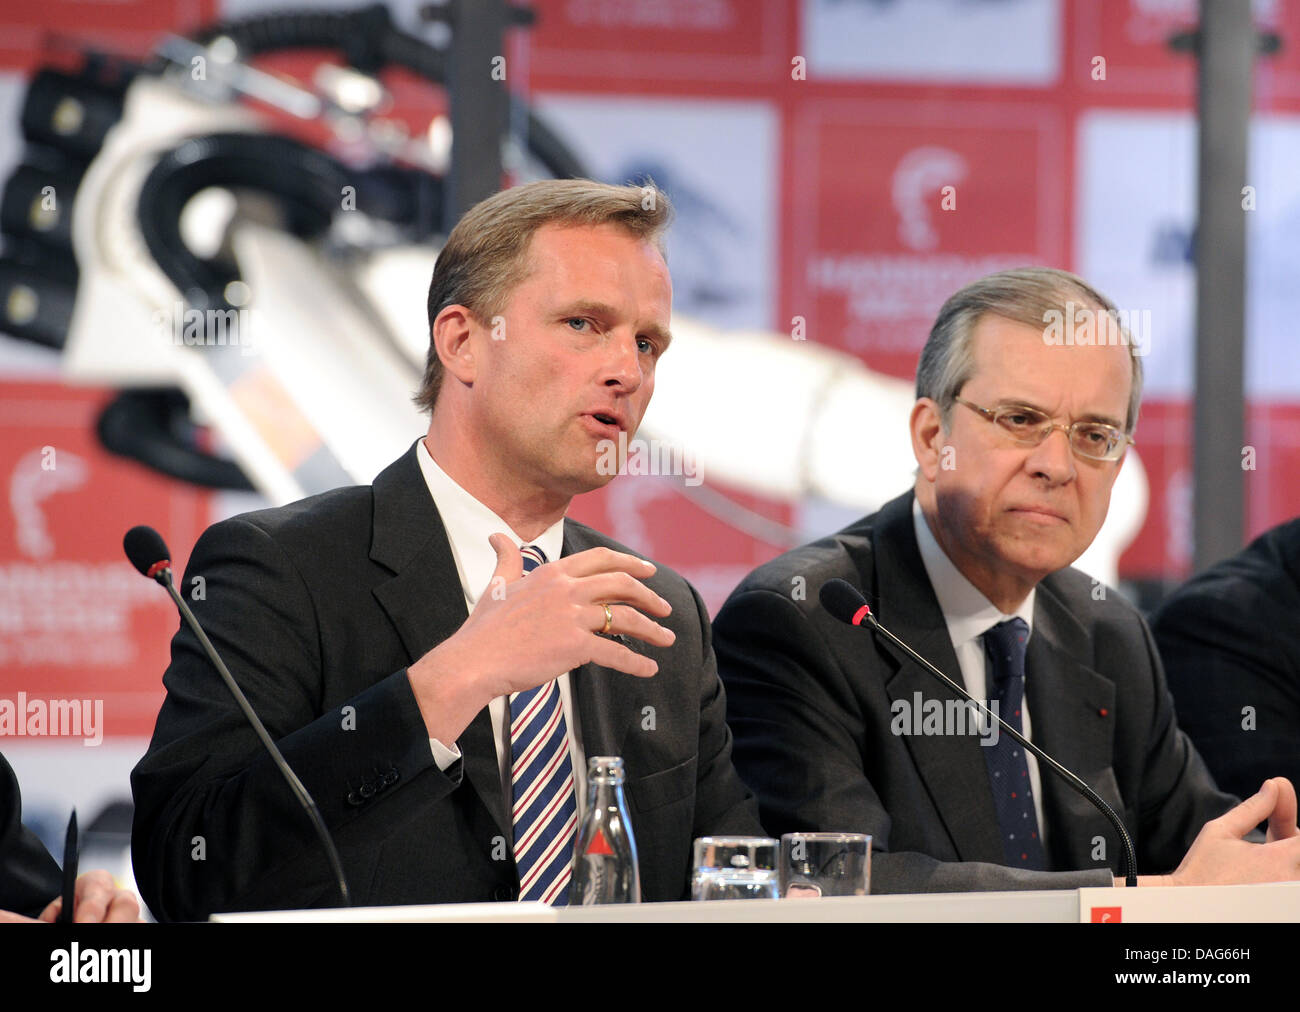 Wolfram von Fritsch (l-r), head of the board of directors of the Messe AG, French ambassador Maurice Gourdault-Montagne attend a press conference for the Trade Fair in Hanover, Germany, 22 March 2011. The Hanover Trade Fair takes place from 4 to 8 April 2011 with this year's partner country France. Under the headline 'smart Efficiency', 13 international exhibitons for the sectors I Stock Photo